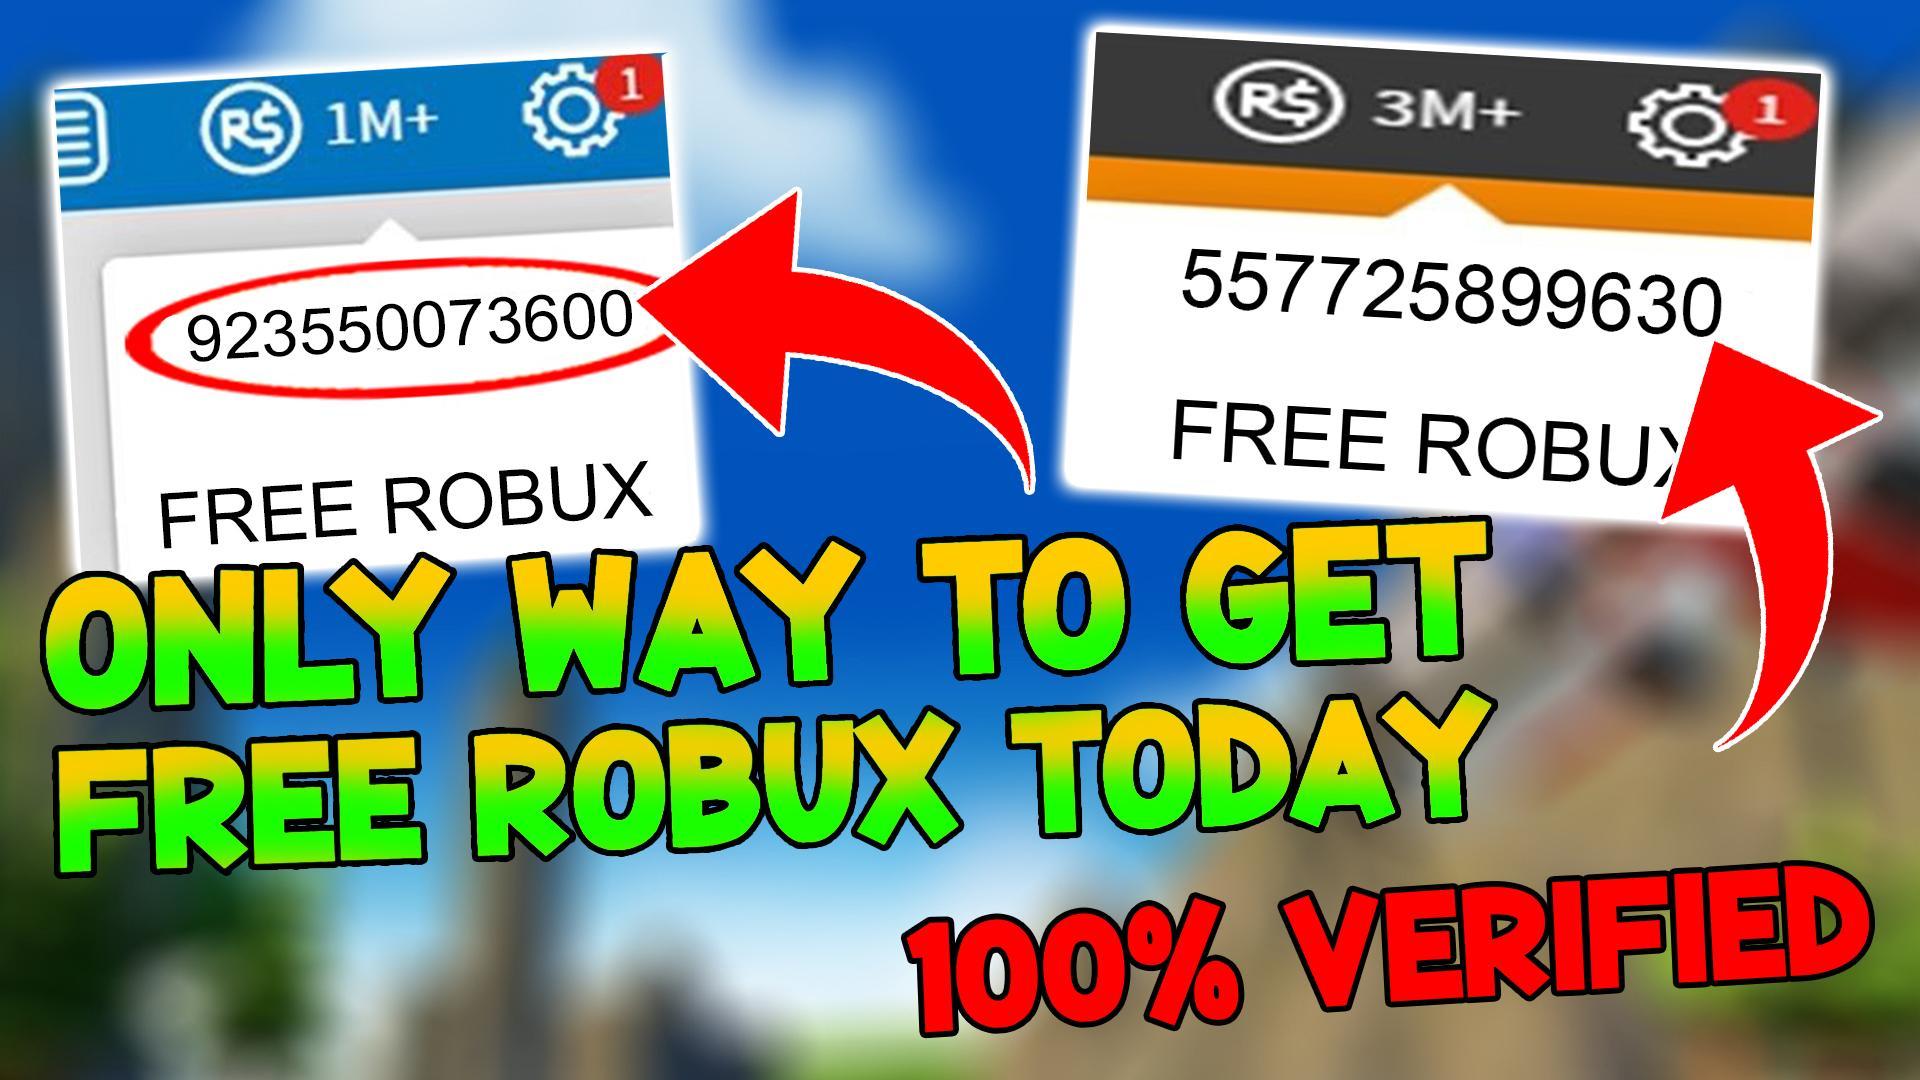 How To Get Unlimited Free Robux 2020 For Android Apk Download - free robux 1m